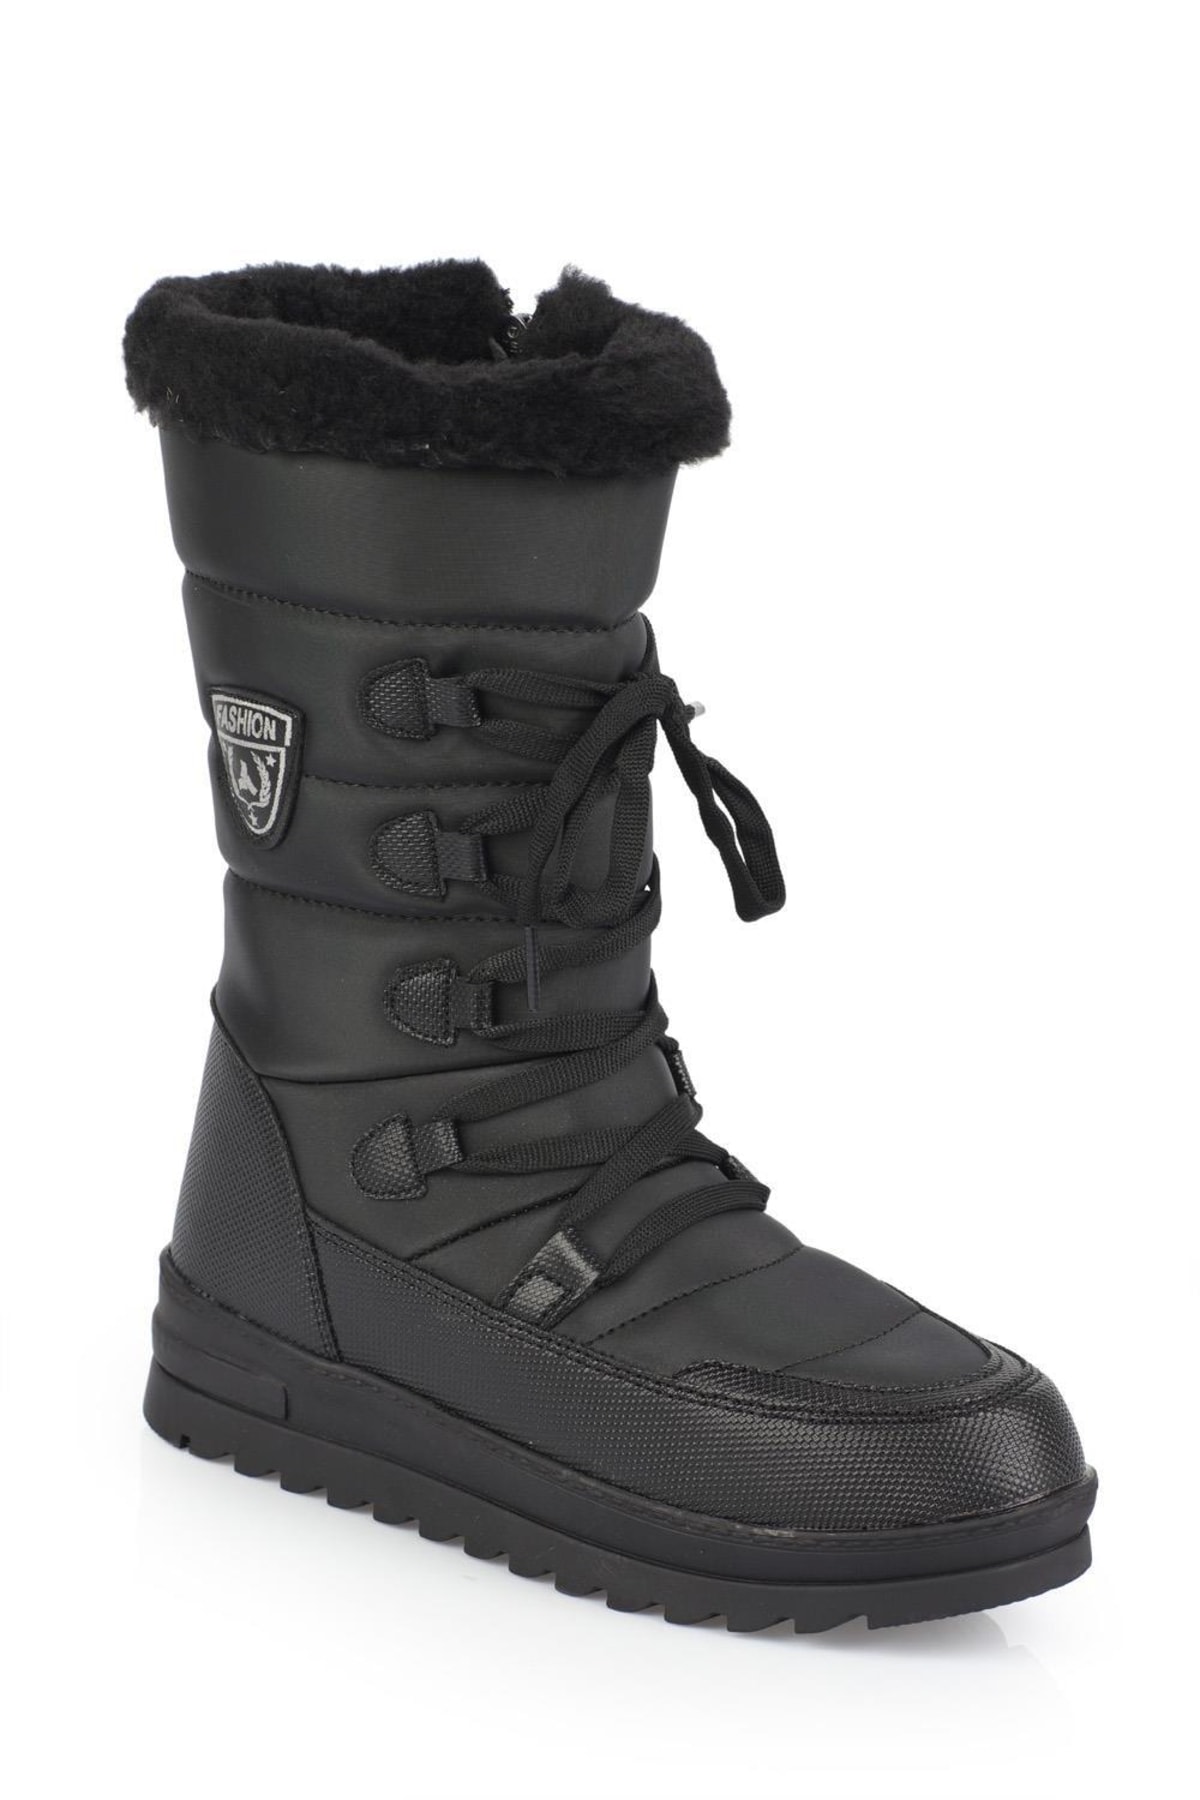 Capone Outfitters Trak Sole Women's Snow Boots with Side Zippered Collar Furry Laced Parachute Fabric